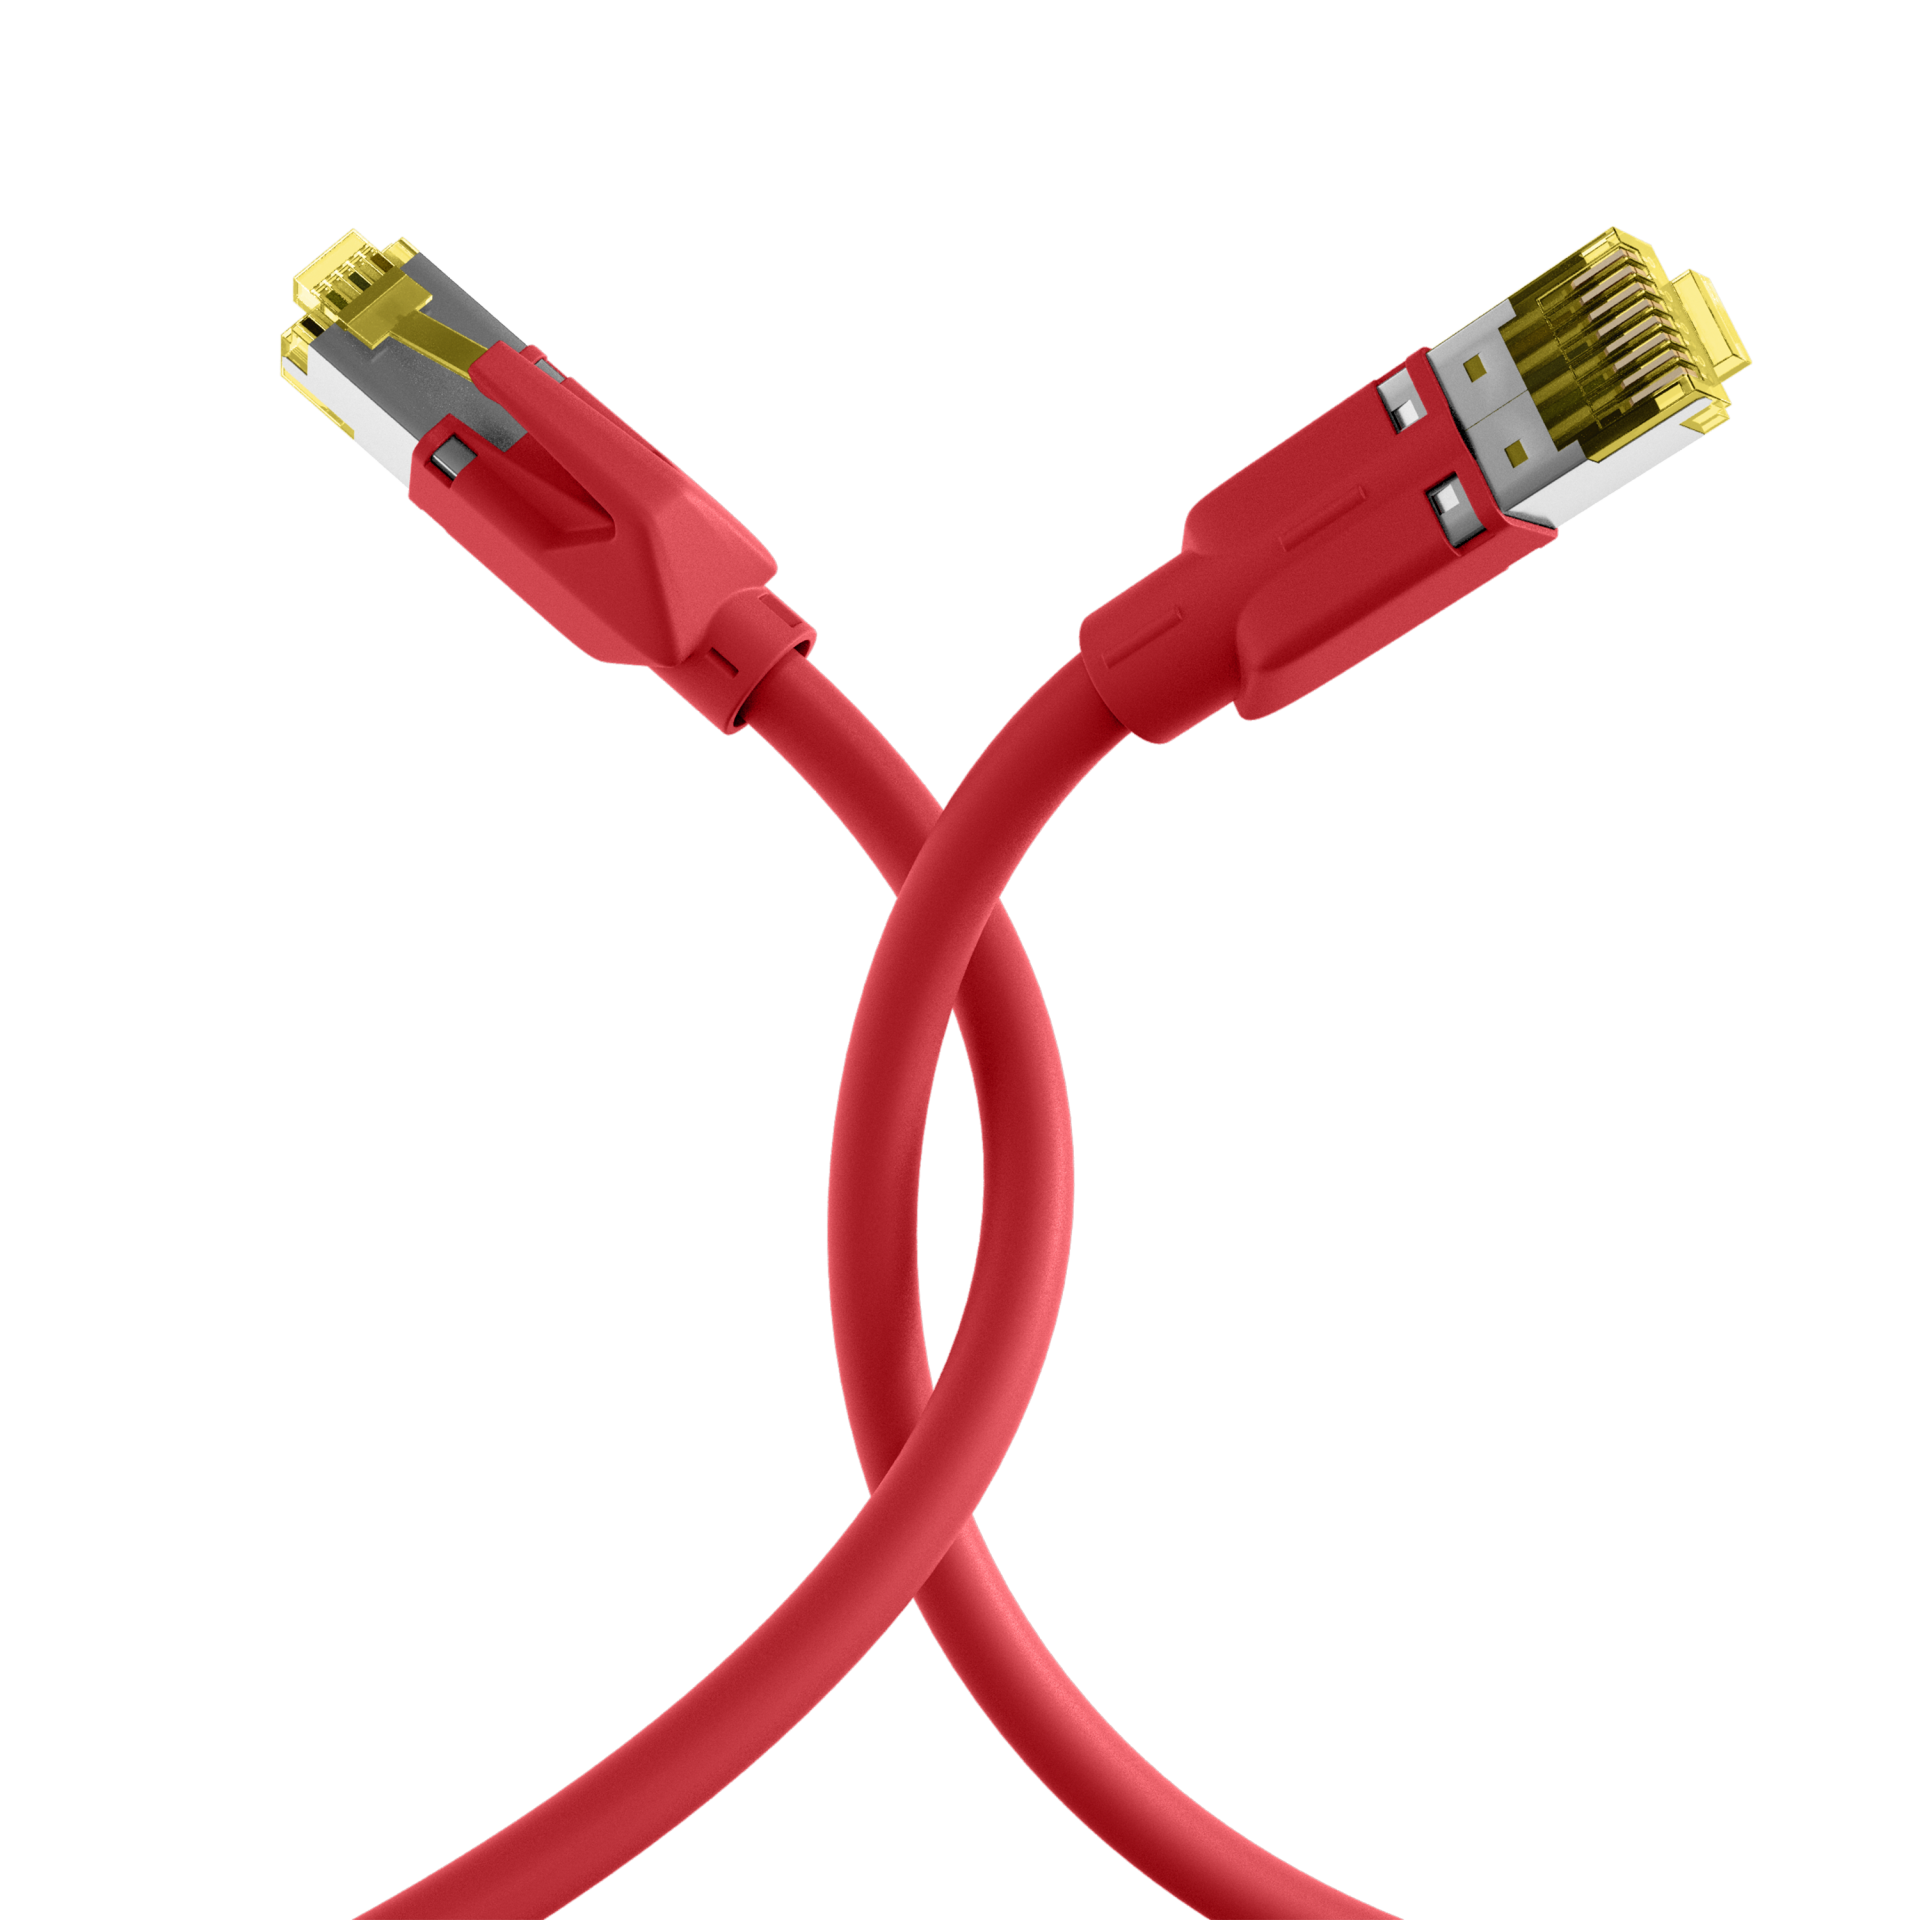 INFRALAN® RJ45 patch cord S/FTP, Cat.6A, TM31, UC900, 3m, red